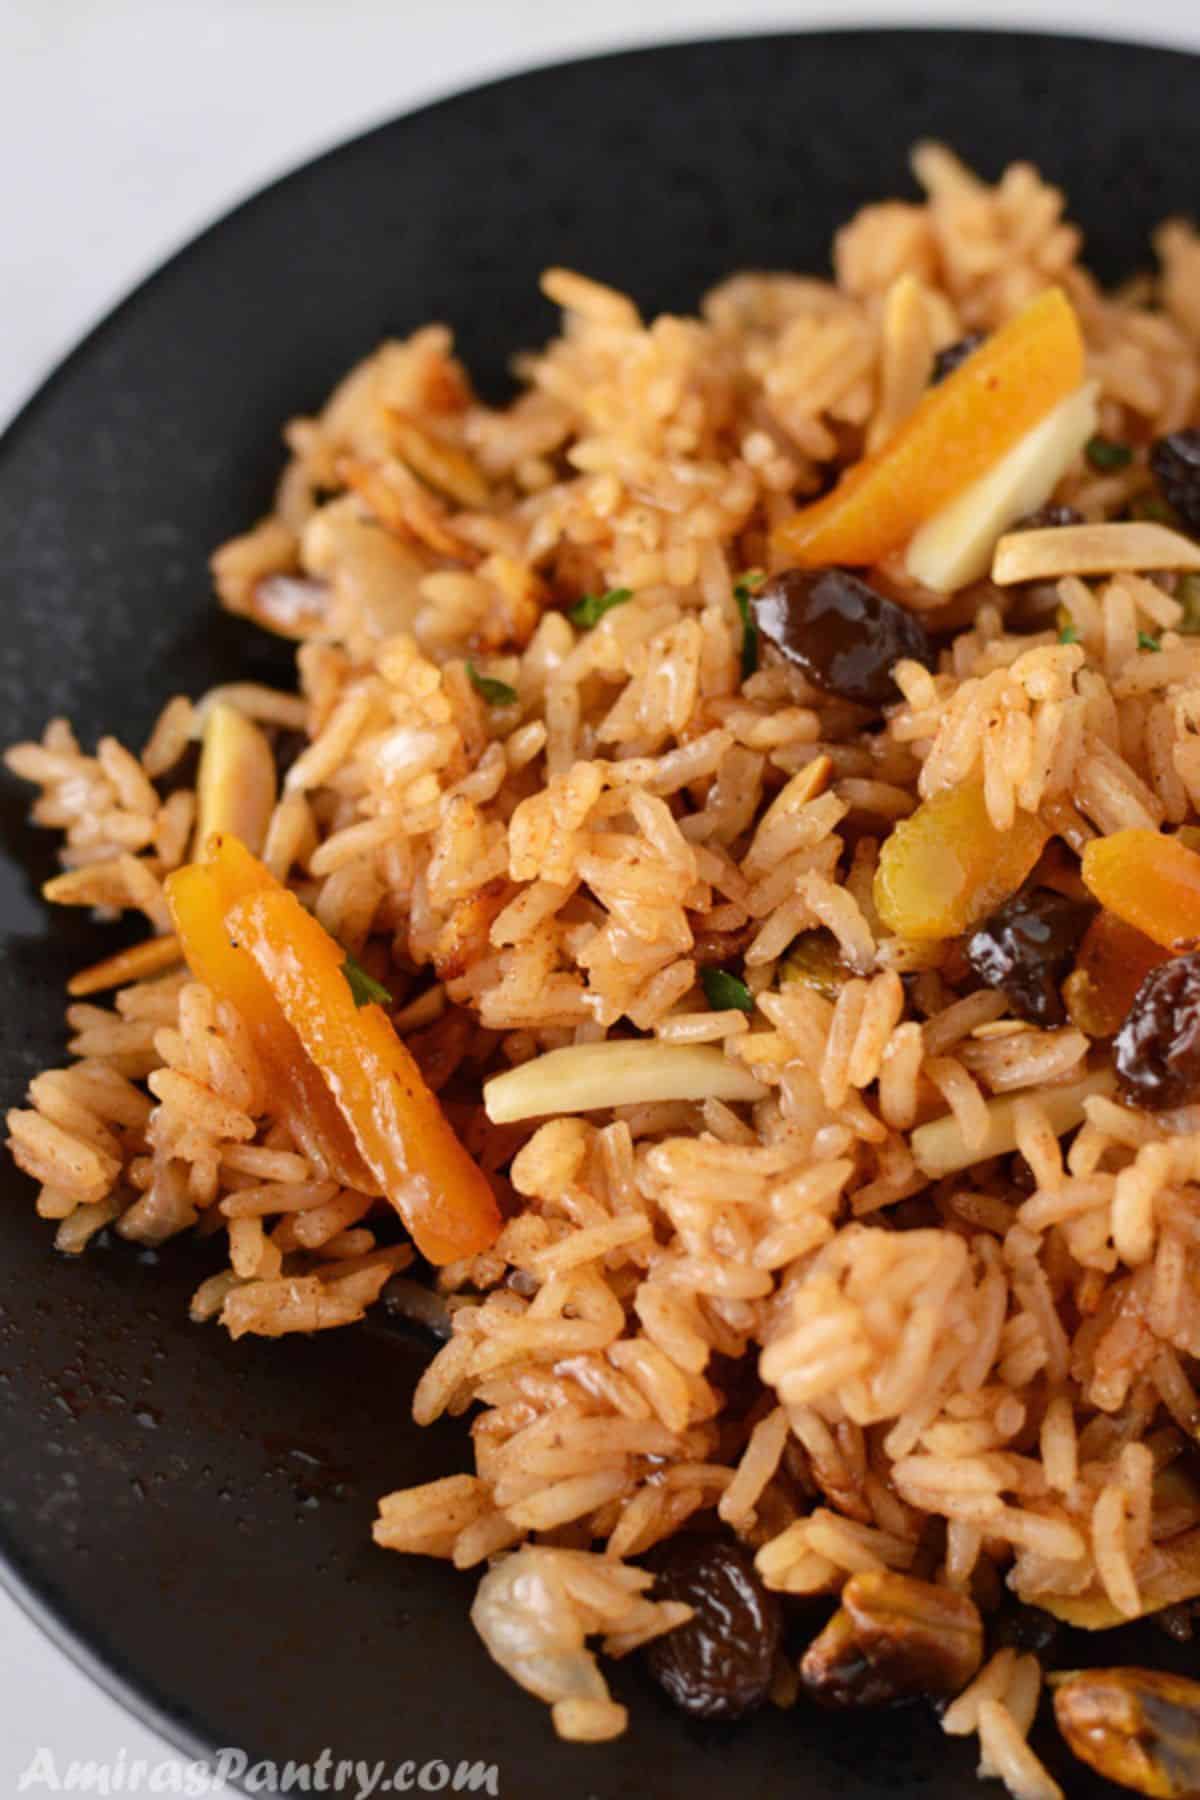 Mediterranean rice pilaf on a black dish garnished with dried fruits.